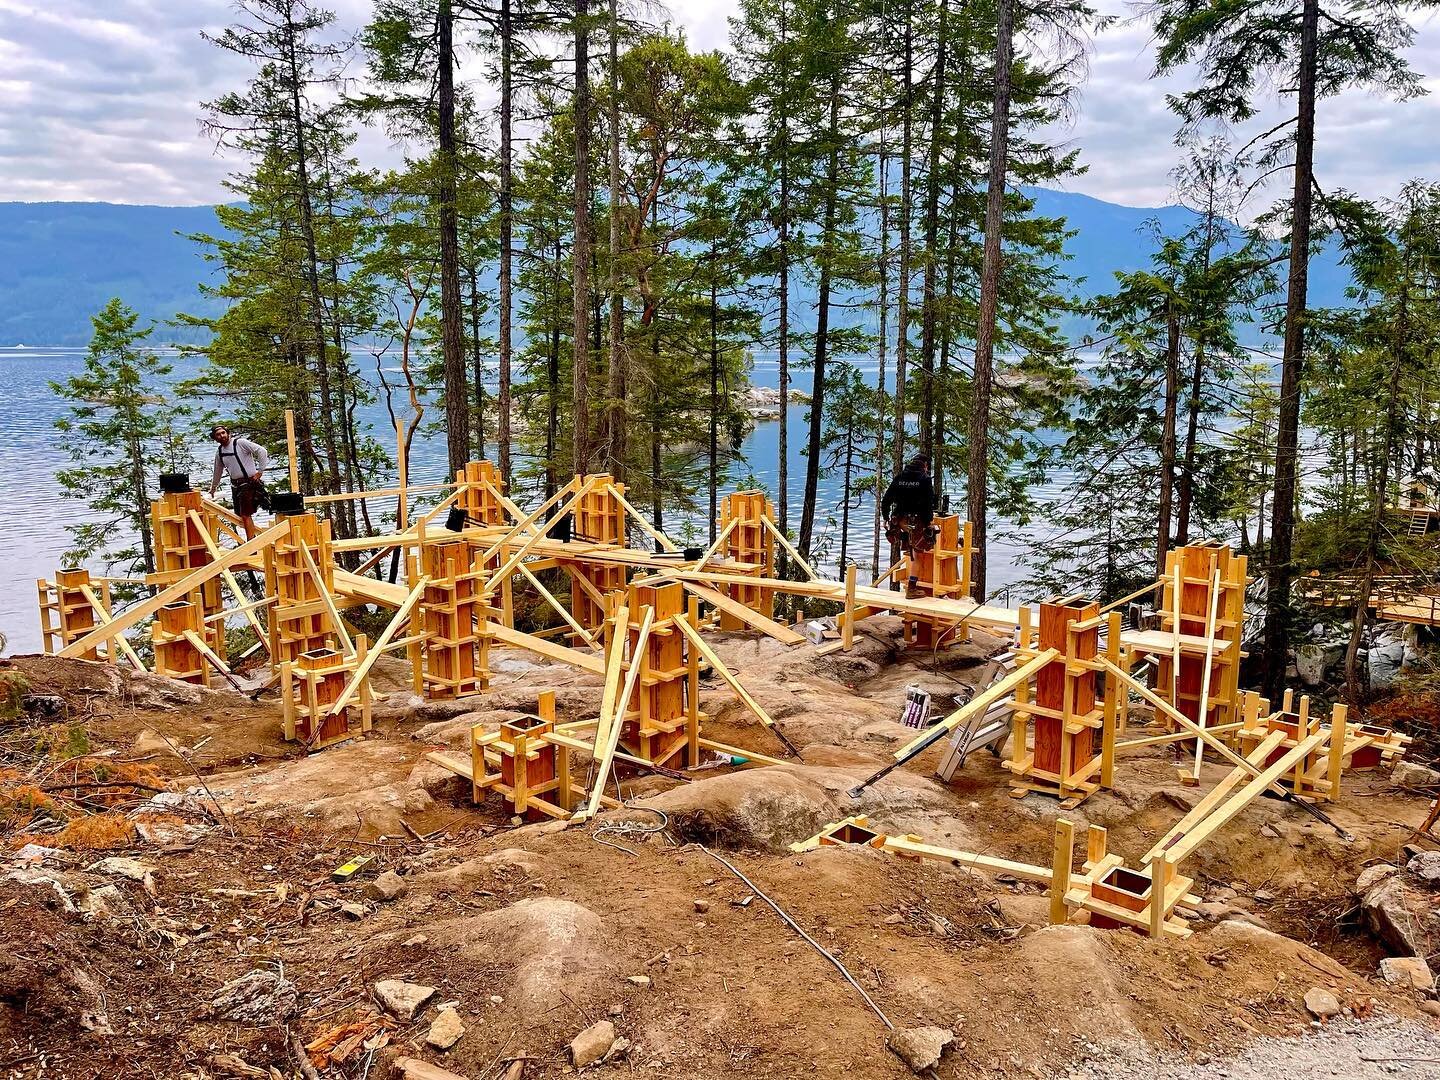 Pour day on Hardy Island. 

@blue_water_concepts 

#sunshinecoast #sunshinecoastbc #powellriver #hardyisland #island #waterfront #view #oceanview #penderharbour #forming #framing #subcontractor #customhomes #homebuilder #carpenter